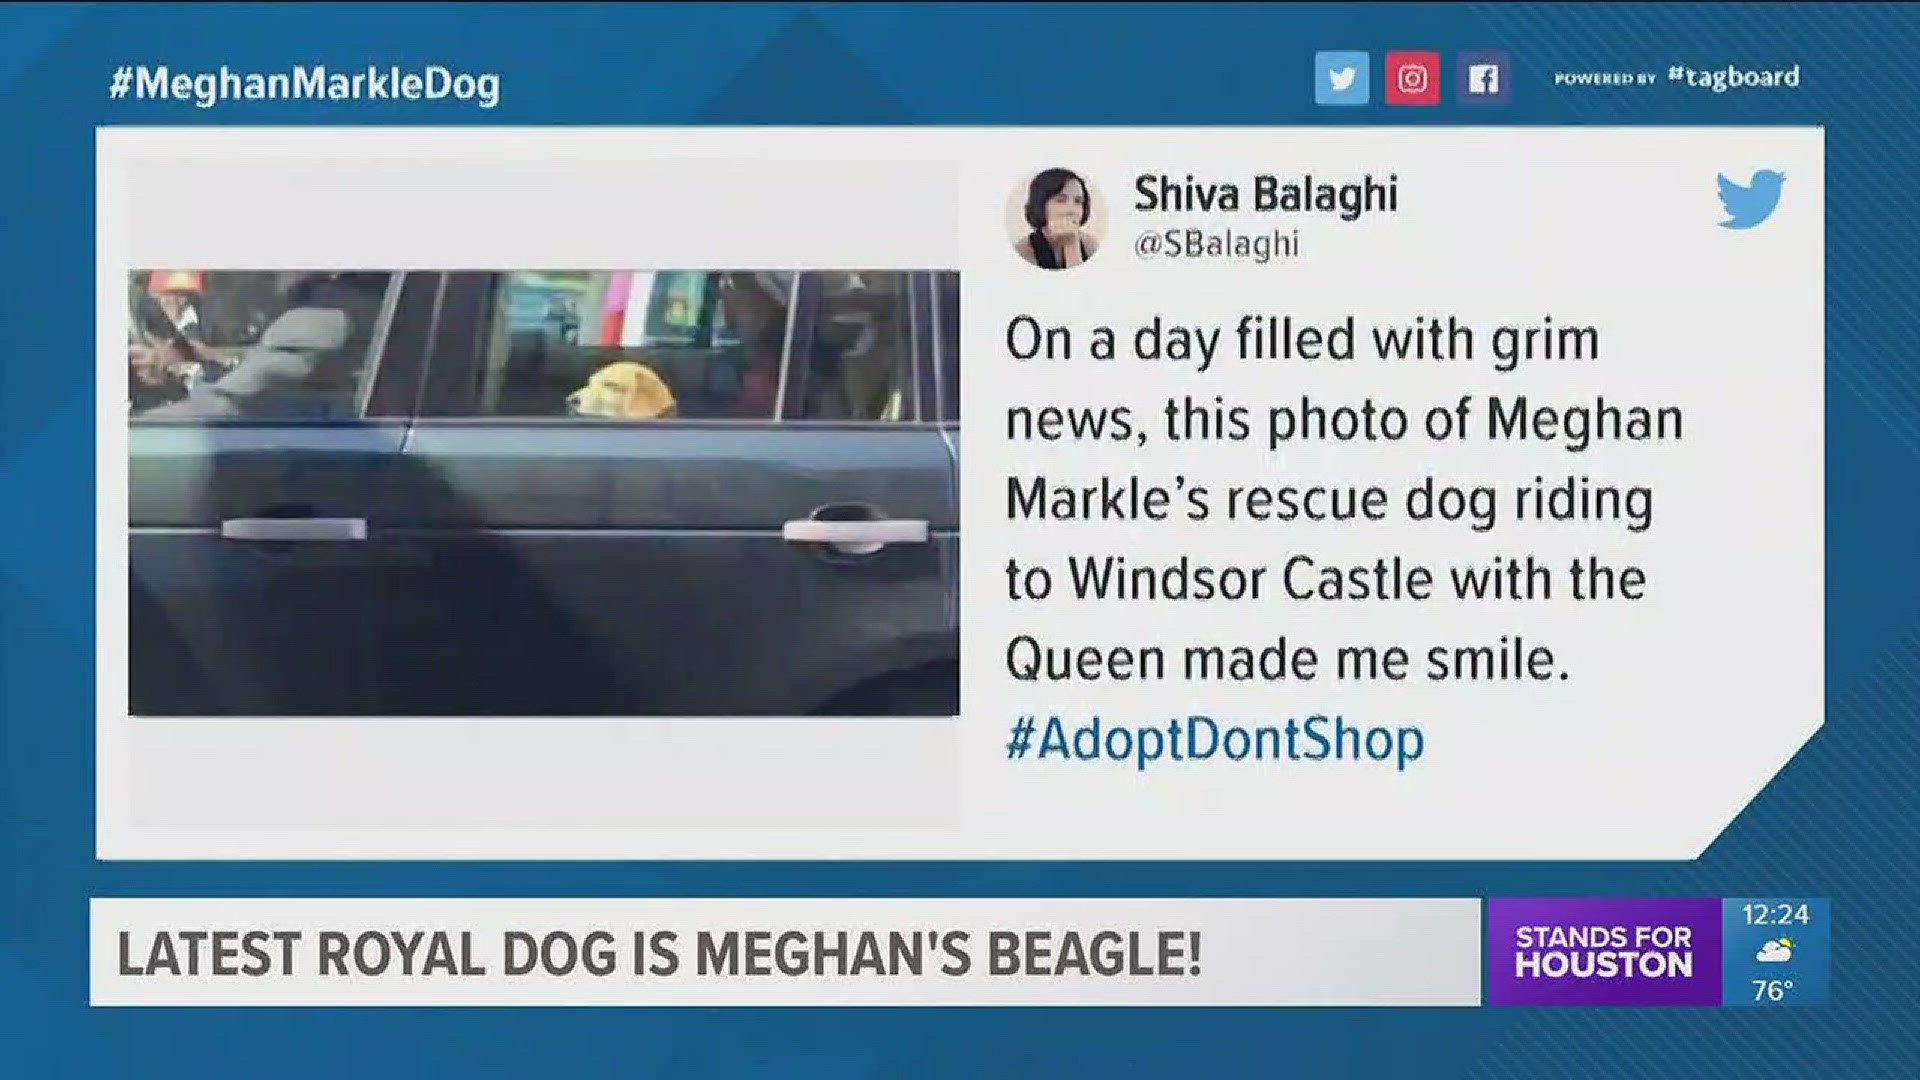 The latest royal dog is not a corgi; he's a beagle rescued in the USA